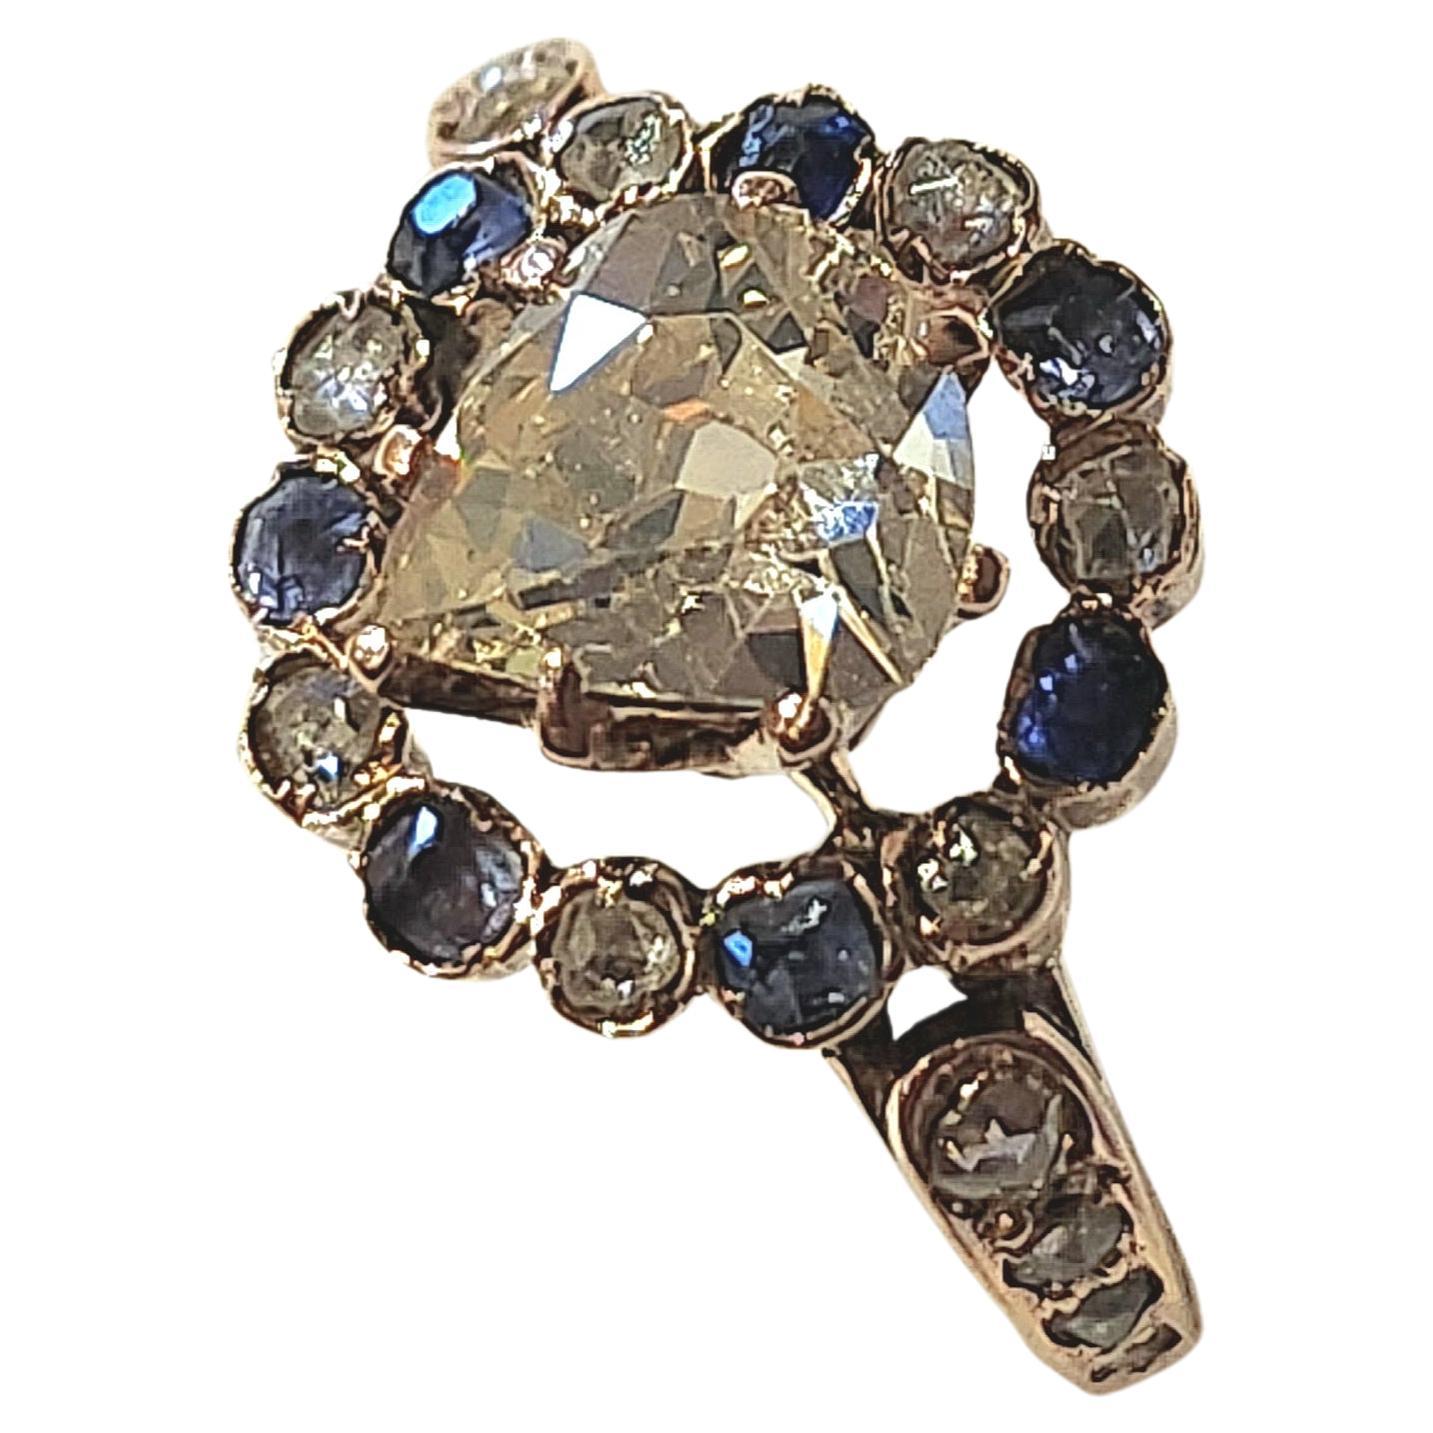 Antique ring centered with heart shape old cut diamond diameter 7.5mm×7mm estimate diamond weight 1.30 carat white color vs clearity excellent spark flanked with smaller diamonds and natural blue sapphire in 14k gold setting ring was made in europe